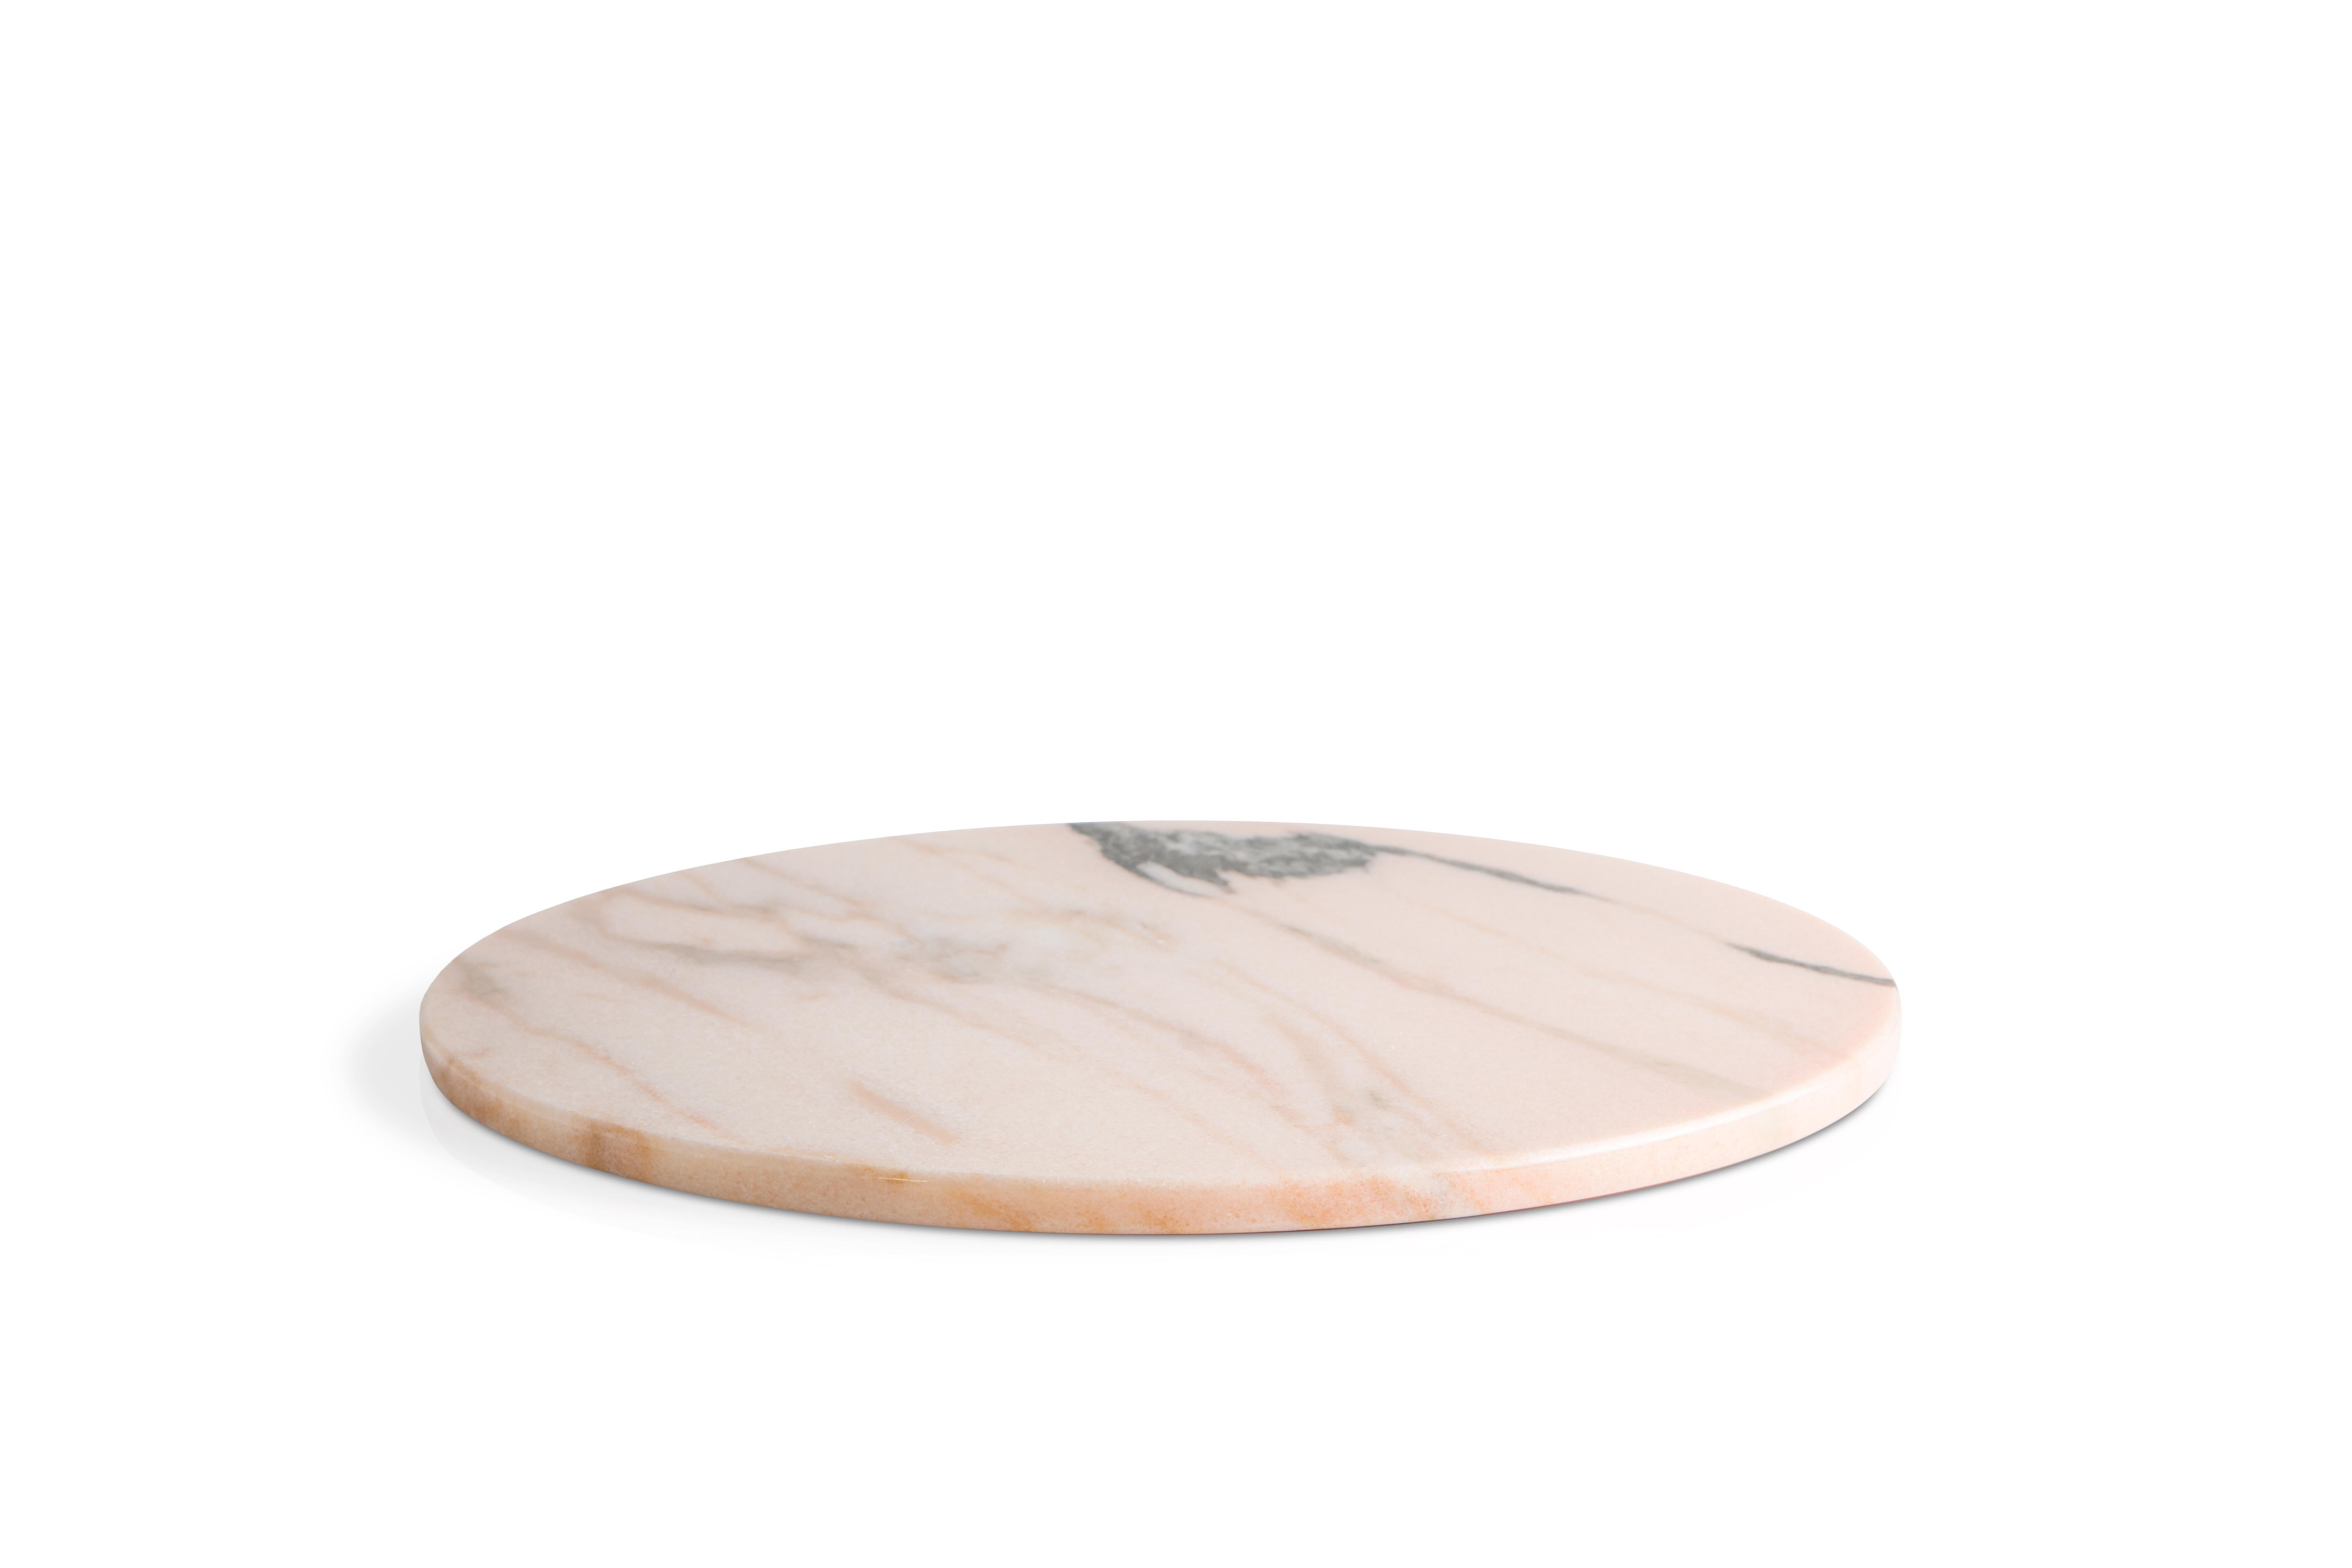 Italian Oval plate in White Carrara Marble Handcrafted in Italy design by Boucquillon